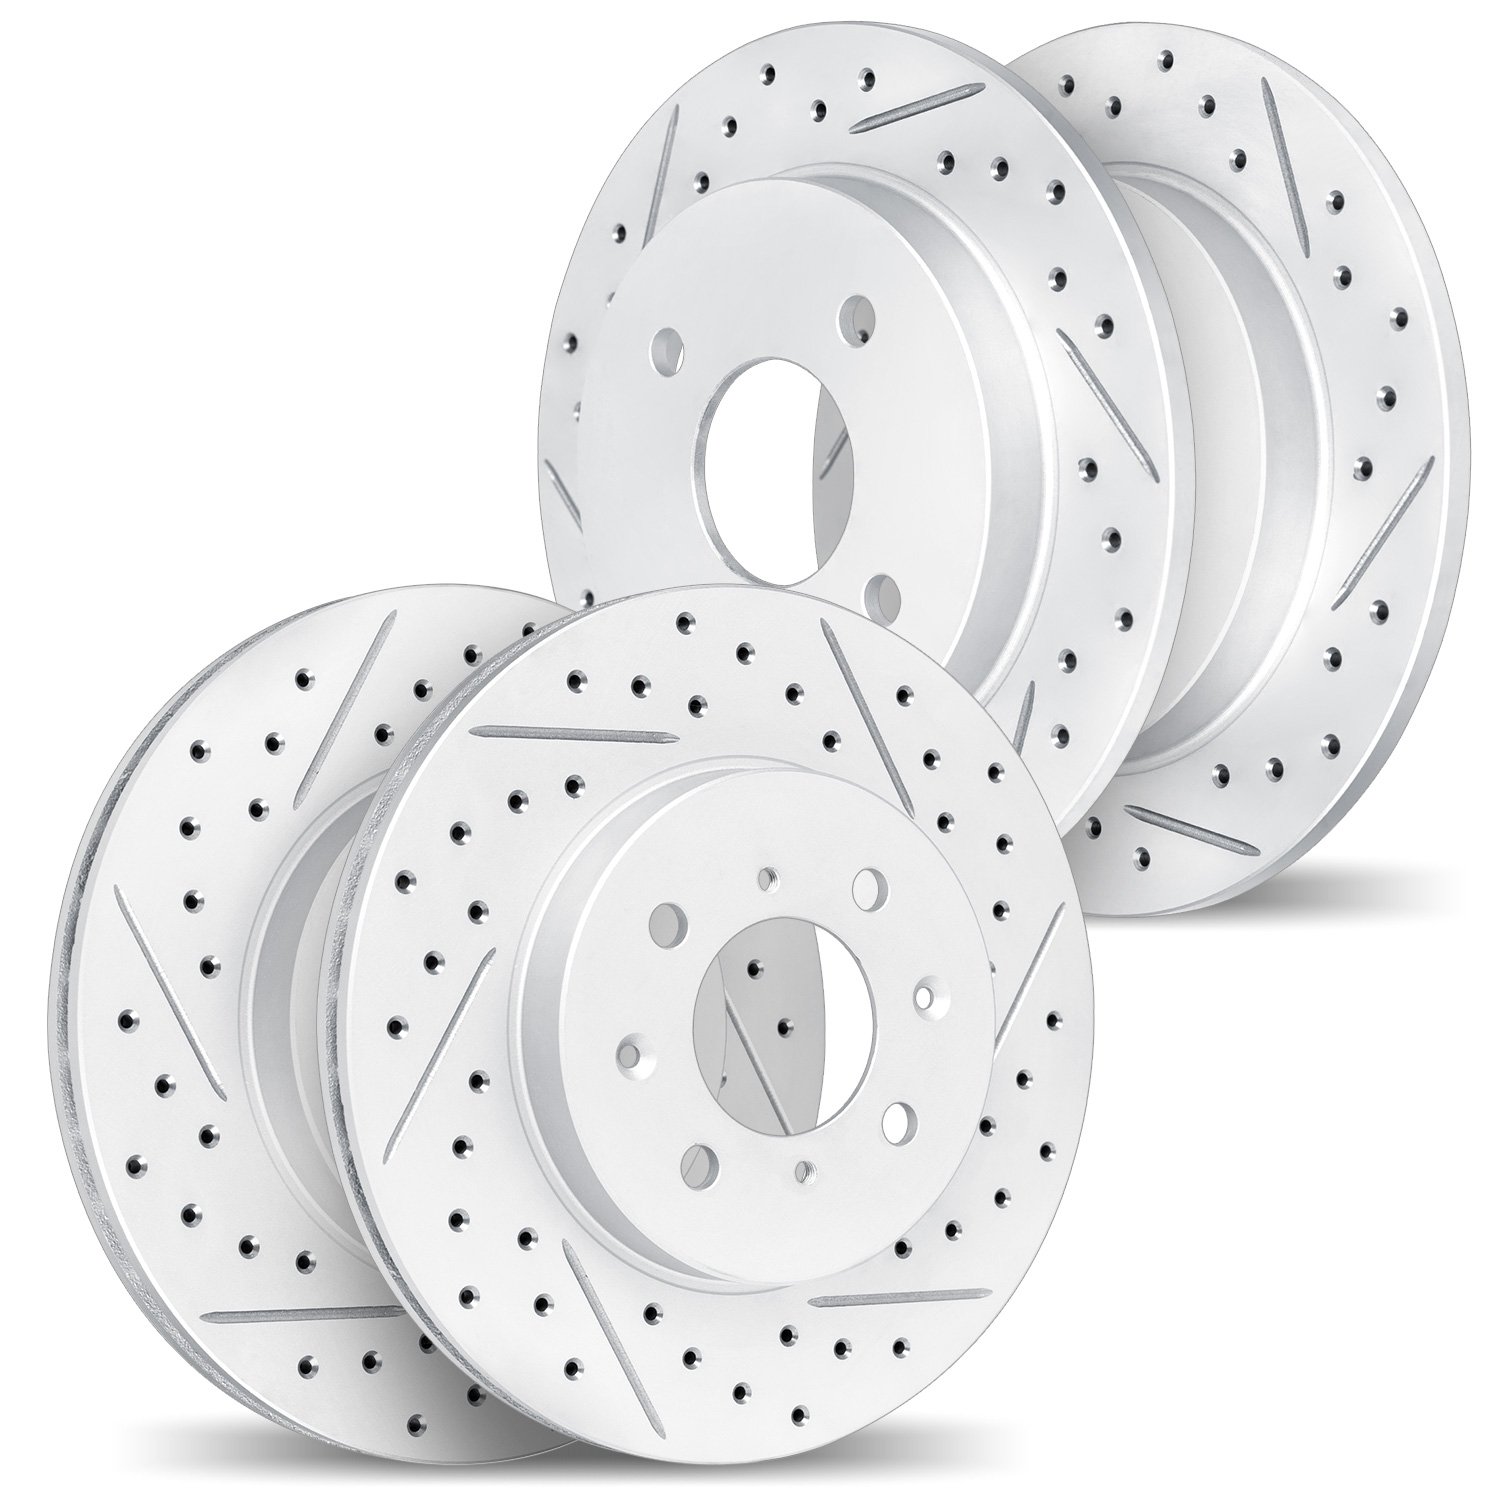 2004-54036 Geoperformance Drilled/Slotted Brake Rotors, Fits Select Ford/Lincoln/Mercury/Mazda, Position: Front and Rear